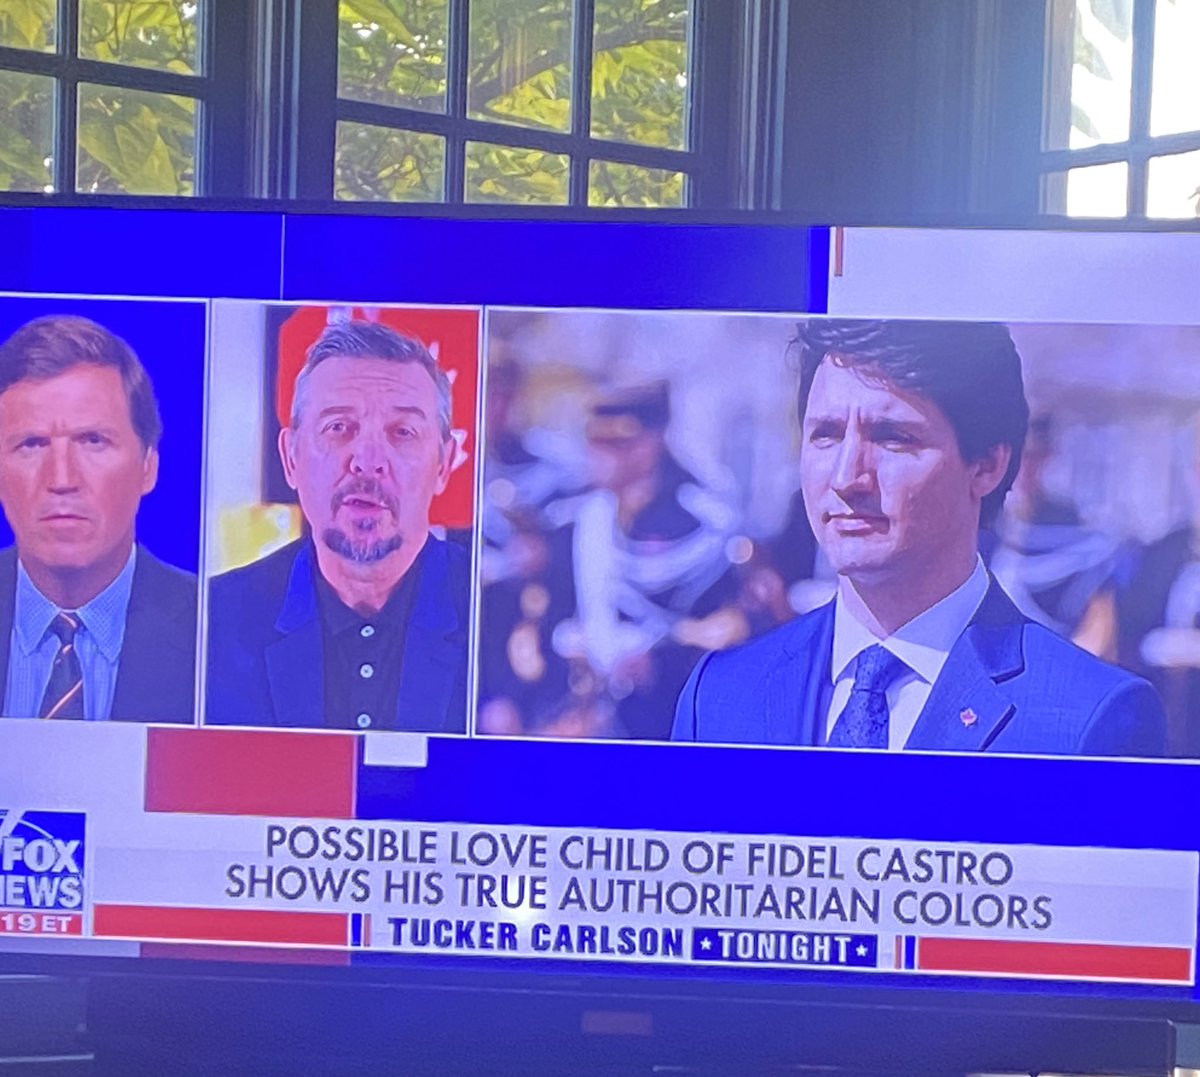 tucker carlson famous chyrons - display device - Fox Ews 19 Et Possible Love Child Of Fidel Castro Shows His True Authoritarian Colors Tucker Carlson Tonight